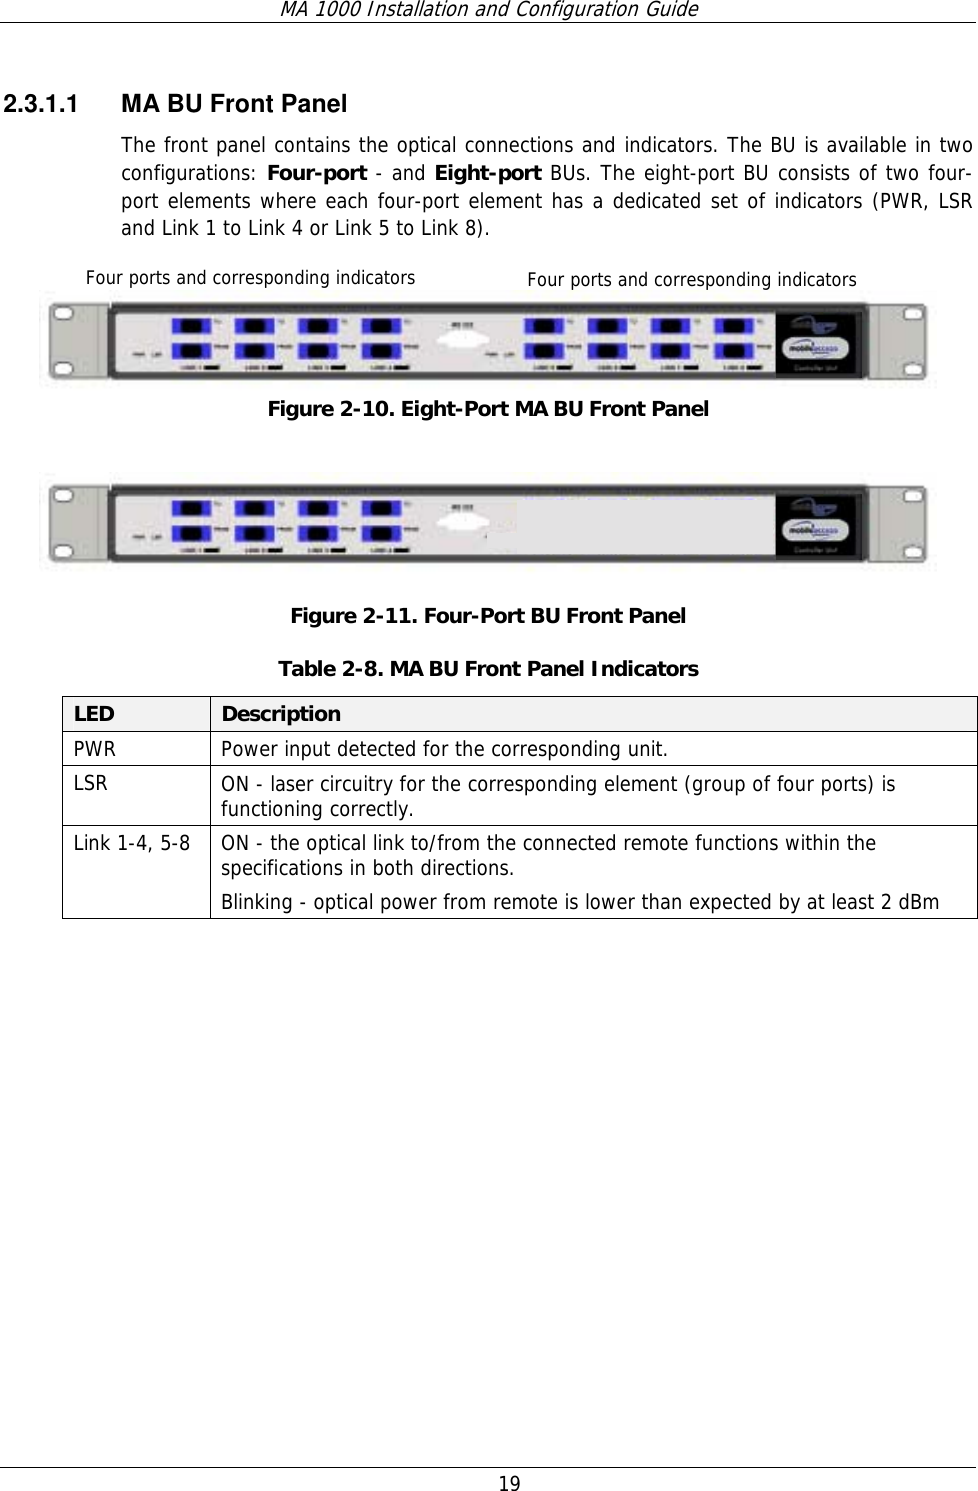 MA 1000 Installation and Configuration Guide  19 2.3.1.1  MA BU Front Panel The front panel contains the optical connections and indicators. The BU is available in two configurations: Four-port - and Eight-port BUs. The eight-port BU consists of two four-port elements where each four-port element has a dedicated set of indicators (PWR, LSR and Link 1 to Link 4 or Link 5 to Link 8).   Figure  2-10. Eight-Port MA BU Front Panel   Figure  2-11. Four-Port BU Front Panel Table  2-8. MA BU Front Panel Indicators LED  Description PWR  Power input detected for the corresponding unit. LSR  ON - laser circuitry for the corresponding element (group of four ports) is functioning correctly. Link 1-4, 5-8  ON - the optical link to/from the connected remote functions within the specifications in both directions.  Blinking - optical power from remote is lower than expected by at least 2 dBm  Four ports and corresponding indicators Four ports and corresponding indicators